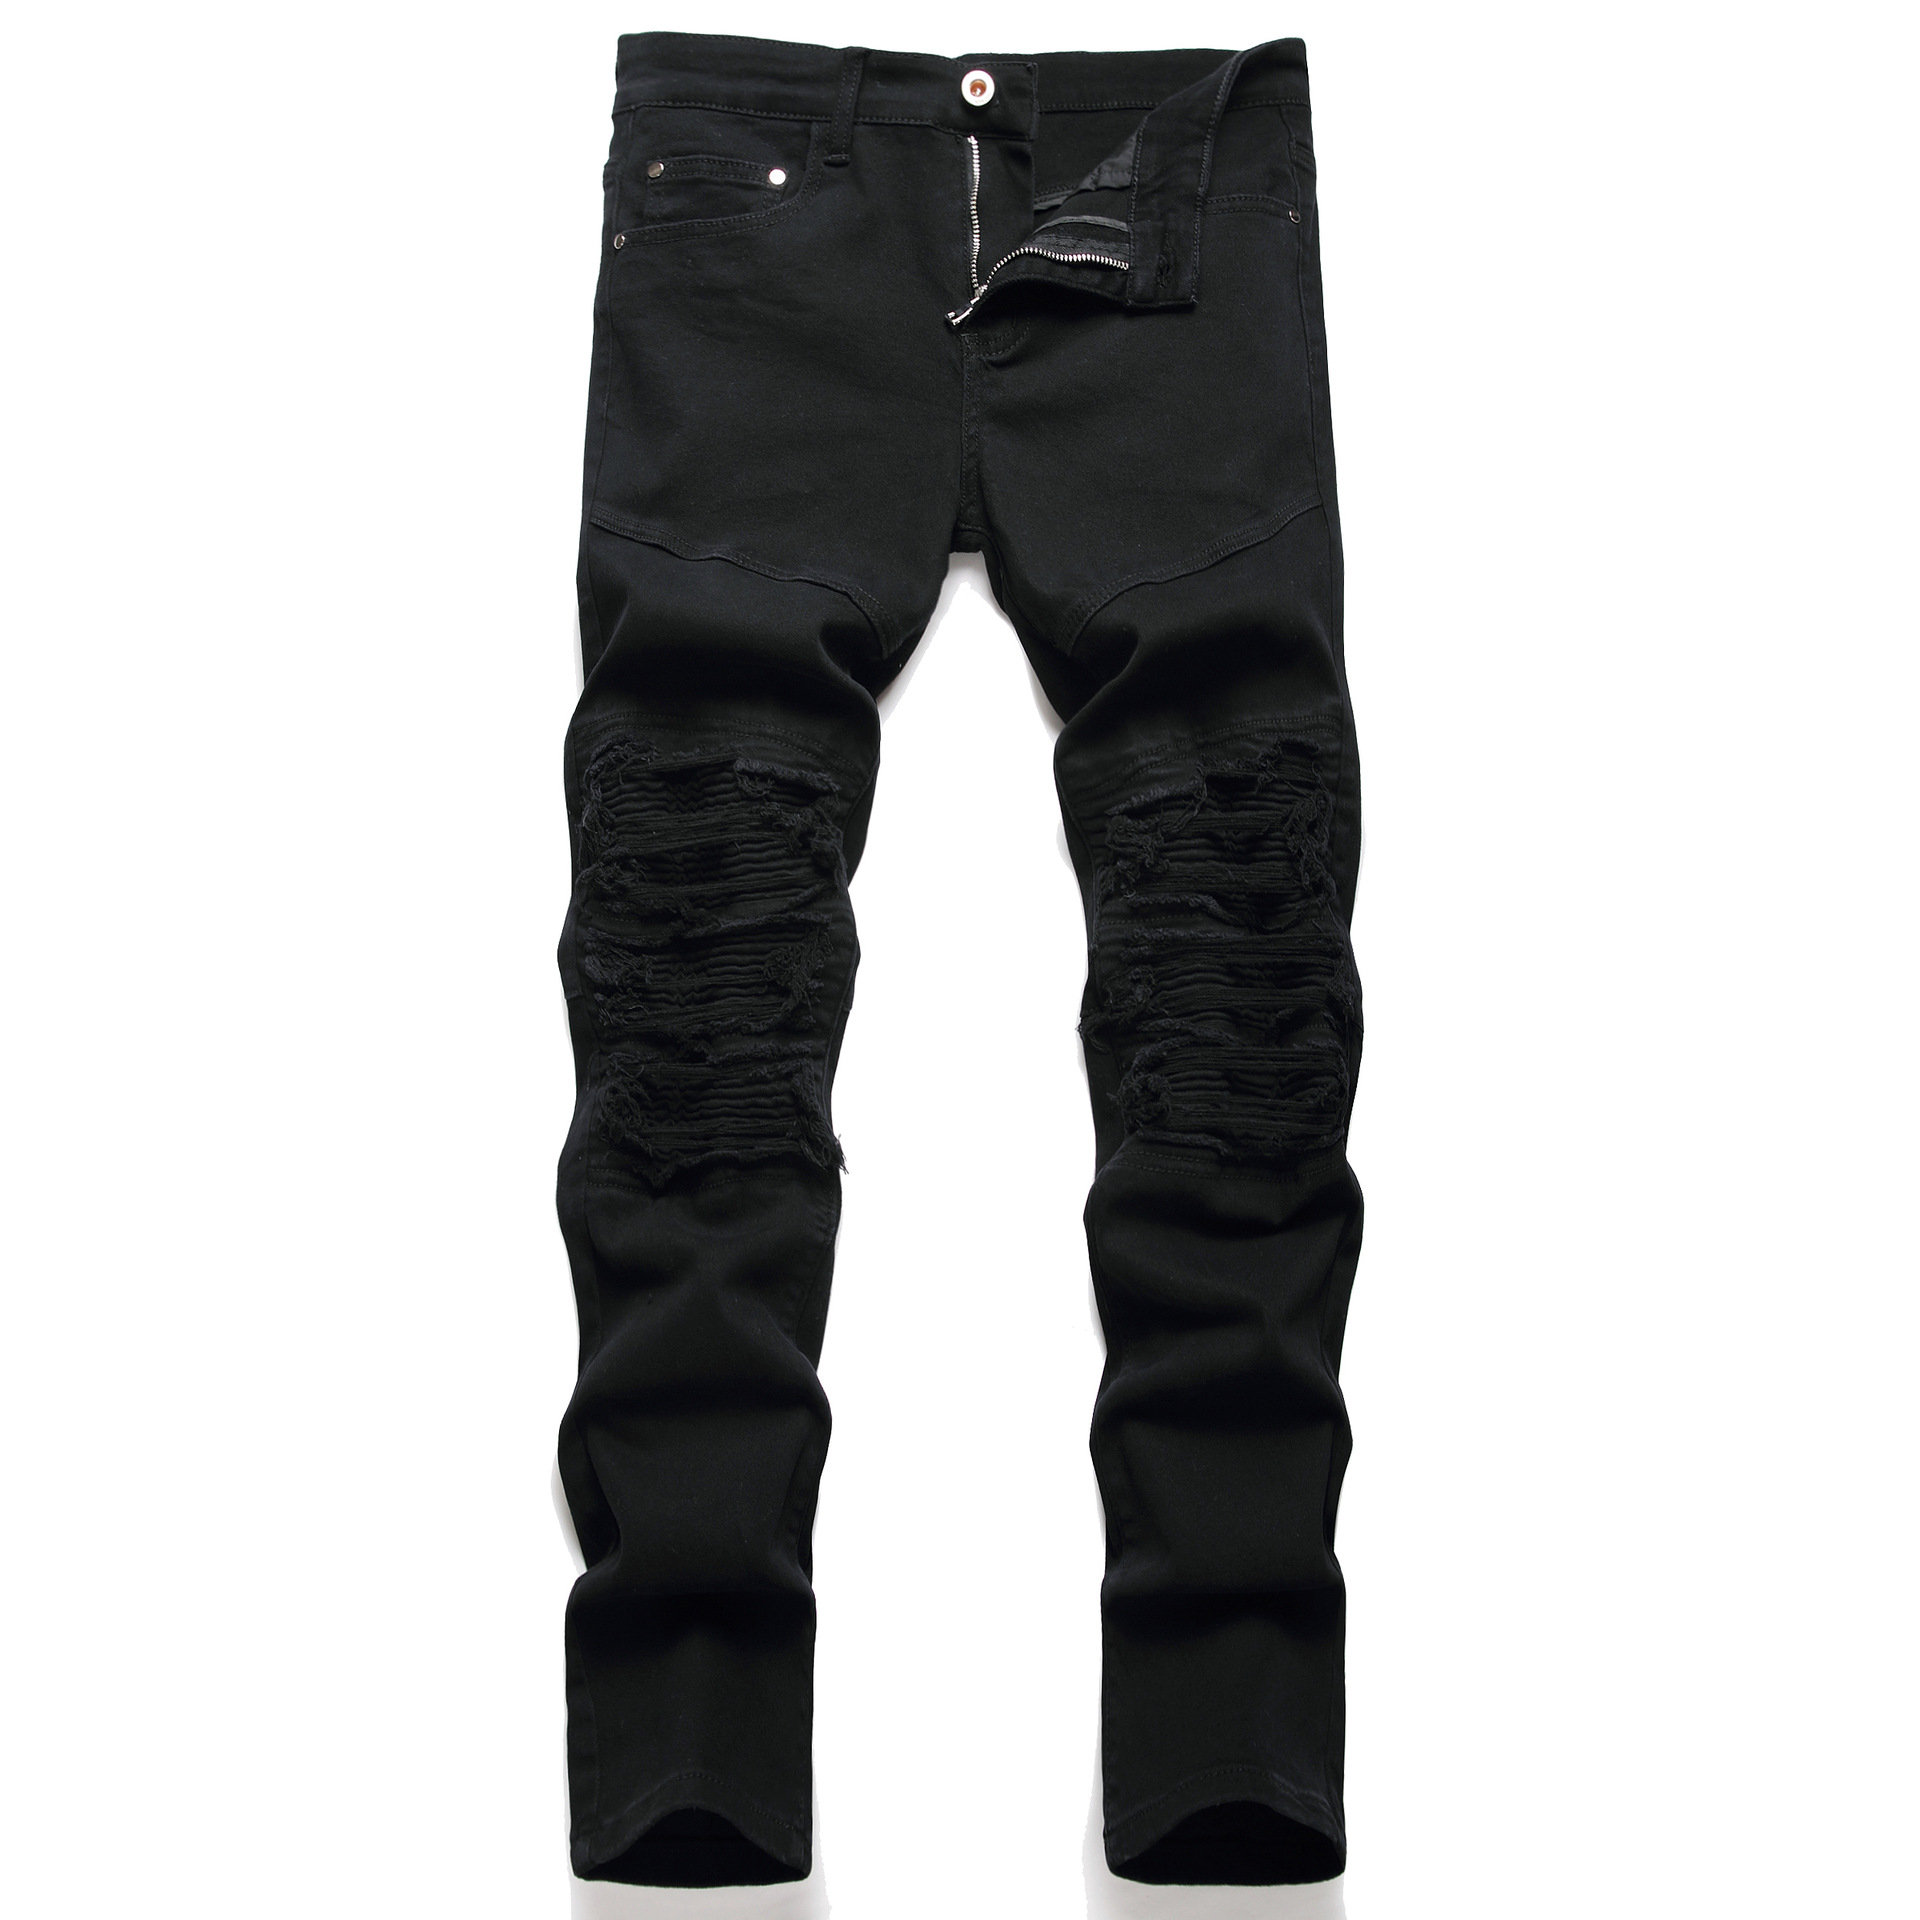 Black Motorcycle Hole Cat Whisker Men's Jeans Slim Straight AliExpress Europe And The United States Foreign Trade Amazon Trousers